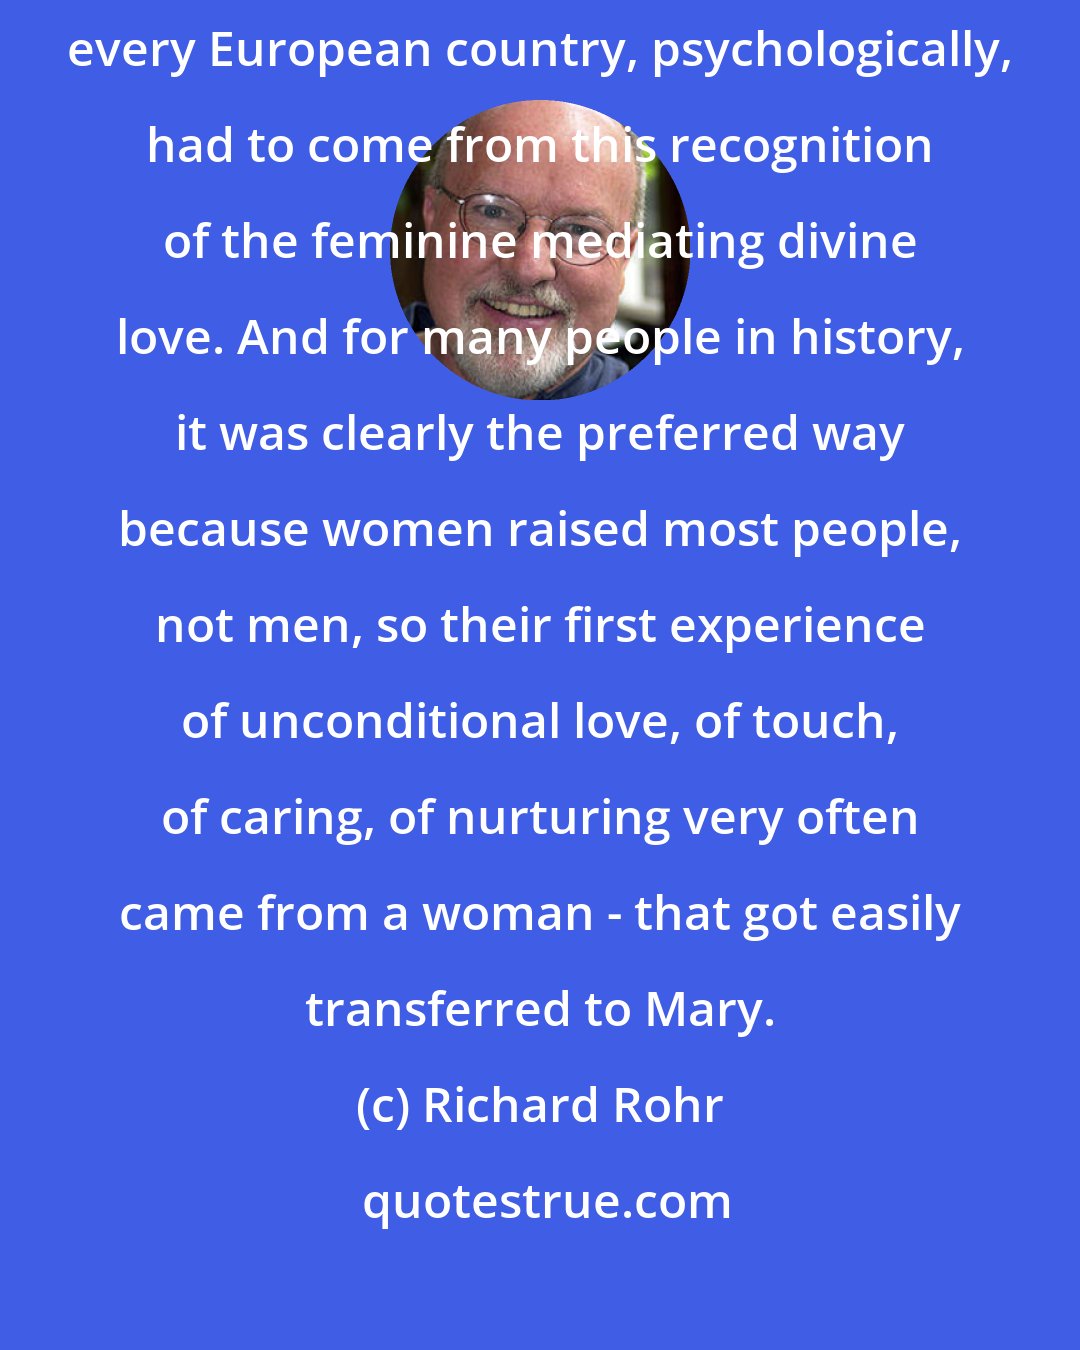 Richard Rohr: When you look at the dominance of Notre Dame, the love of Mary in almost every European country, psychologically, had to come from this recognition of the feminine mediating divine love. And for many people in history, it was clearly the preferred way because women raised most people, not men, so their first experience of unconditional love, of touch, of caring, of nurturing very often came from a woman - that got easily transferred to Mary.